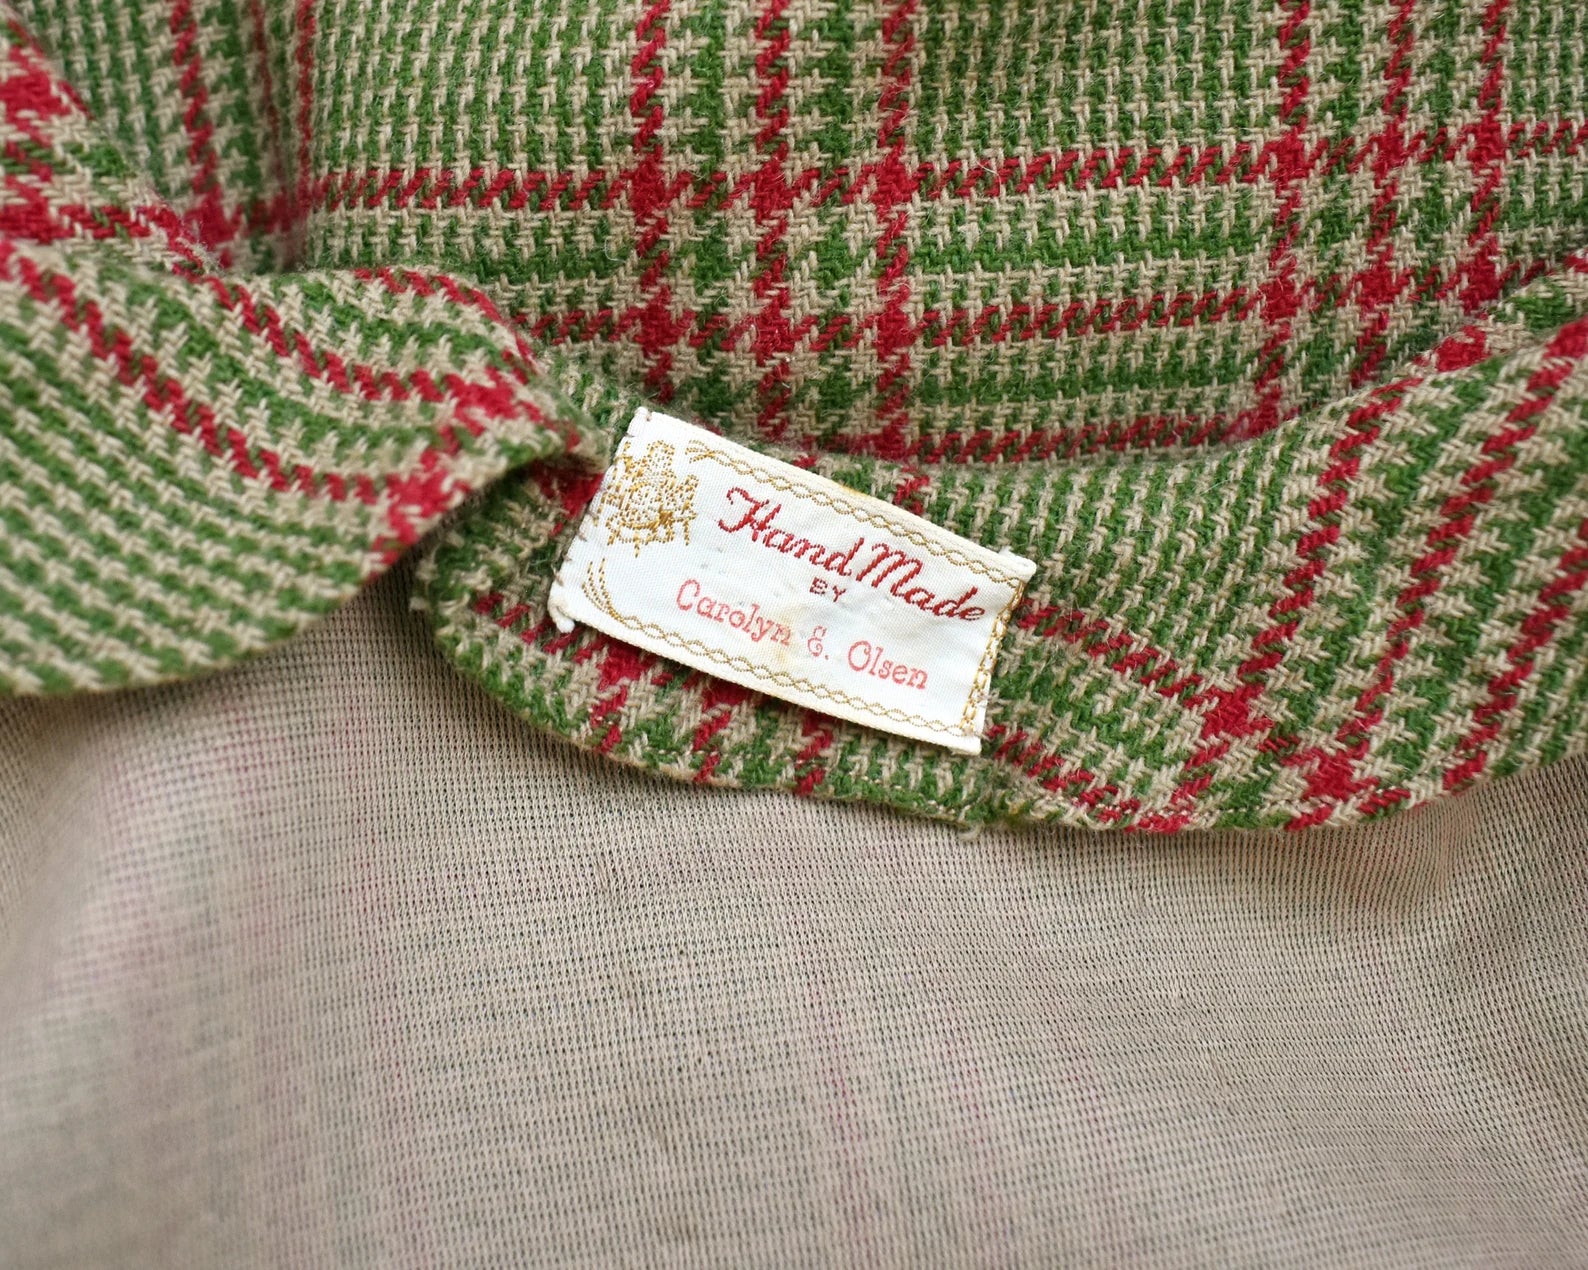 Close up of the tag which says Hand Made by Carolyn E. Olsen